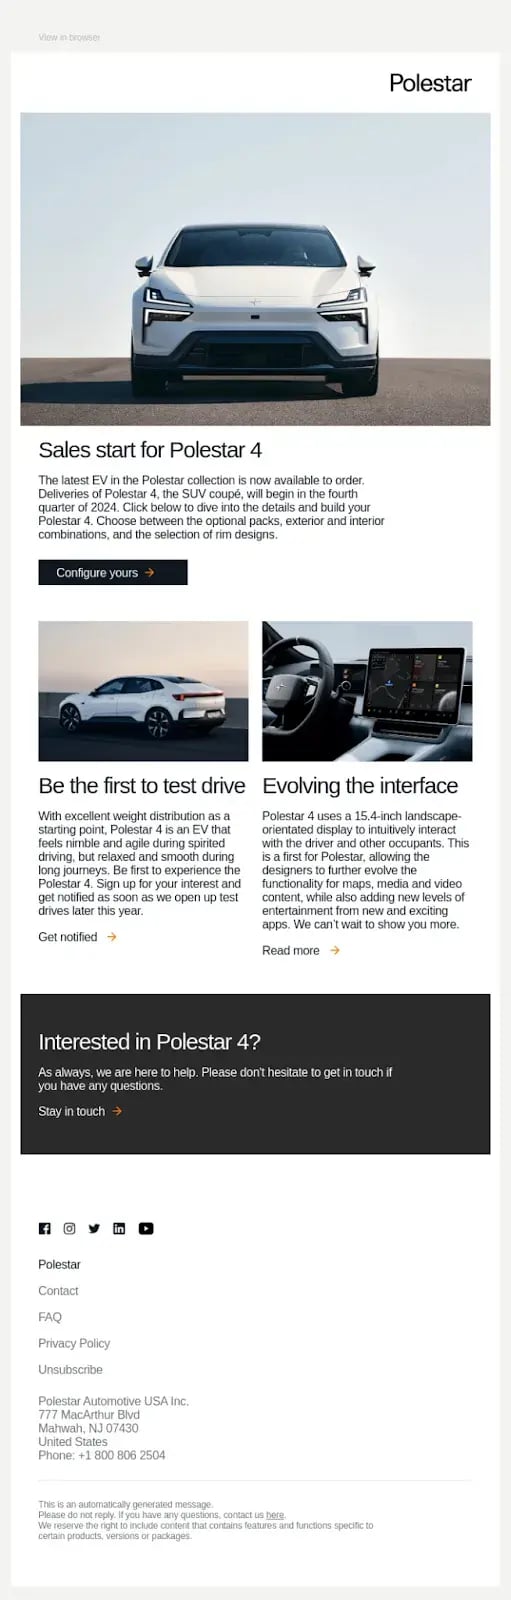 Polestar’s email announces the launch of its new EV.